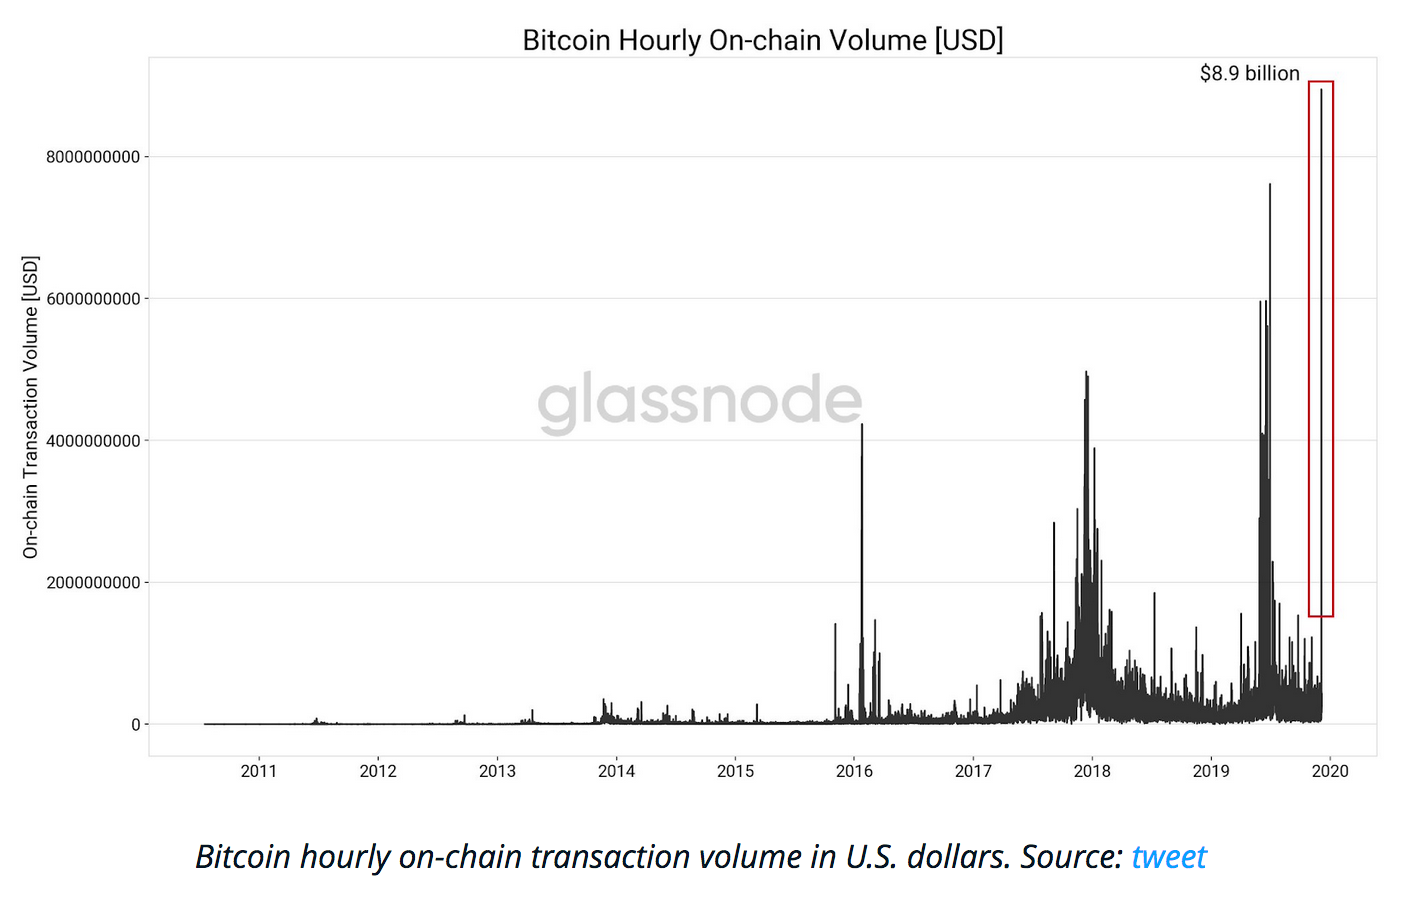 Almost $9 Billion of Bitcoin Moved On-Chain In 1 Hour: Record